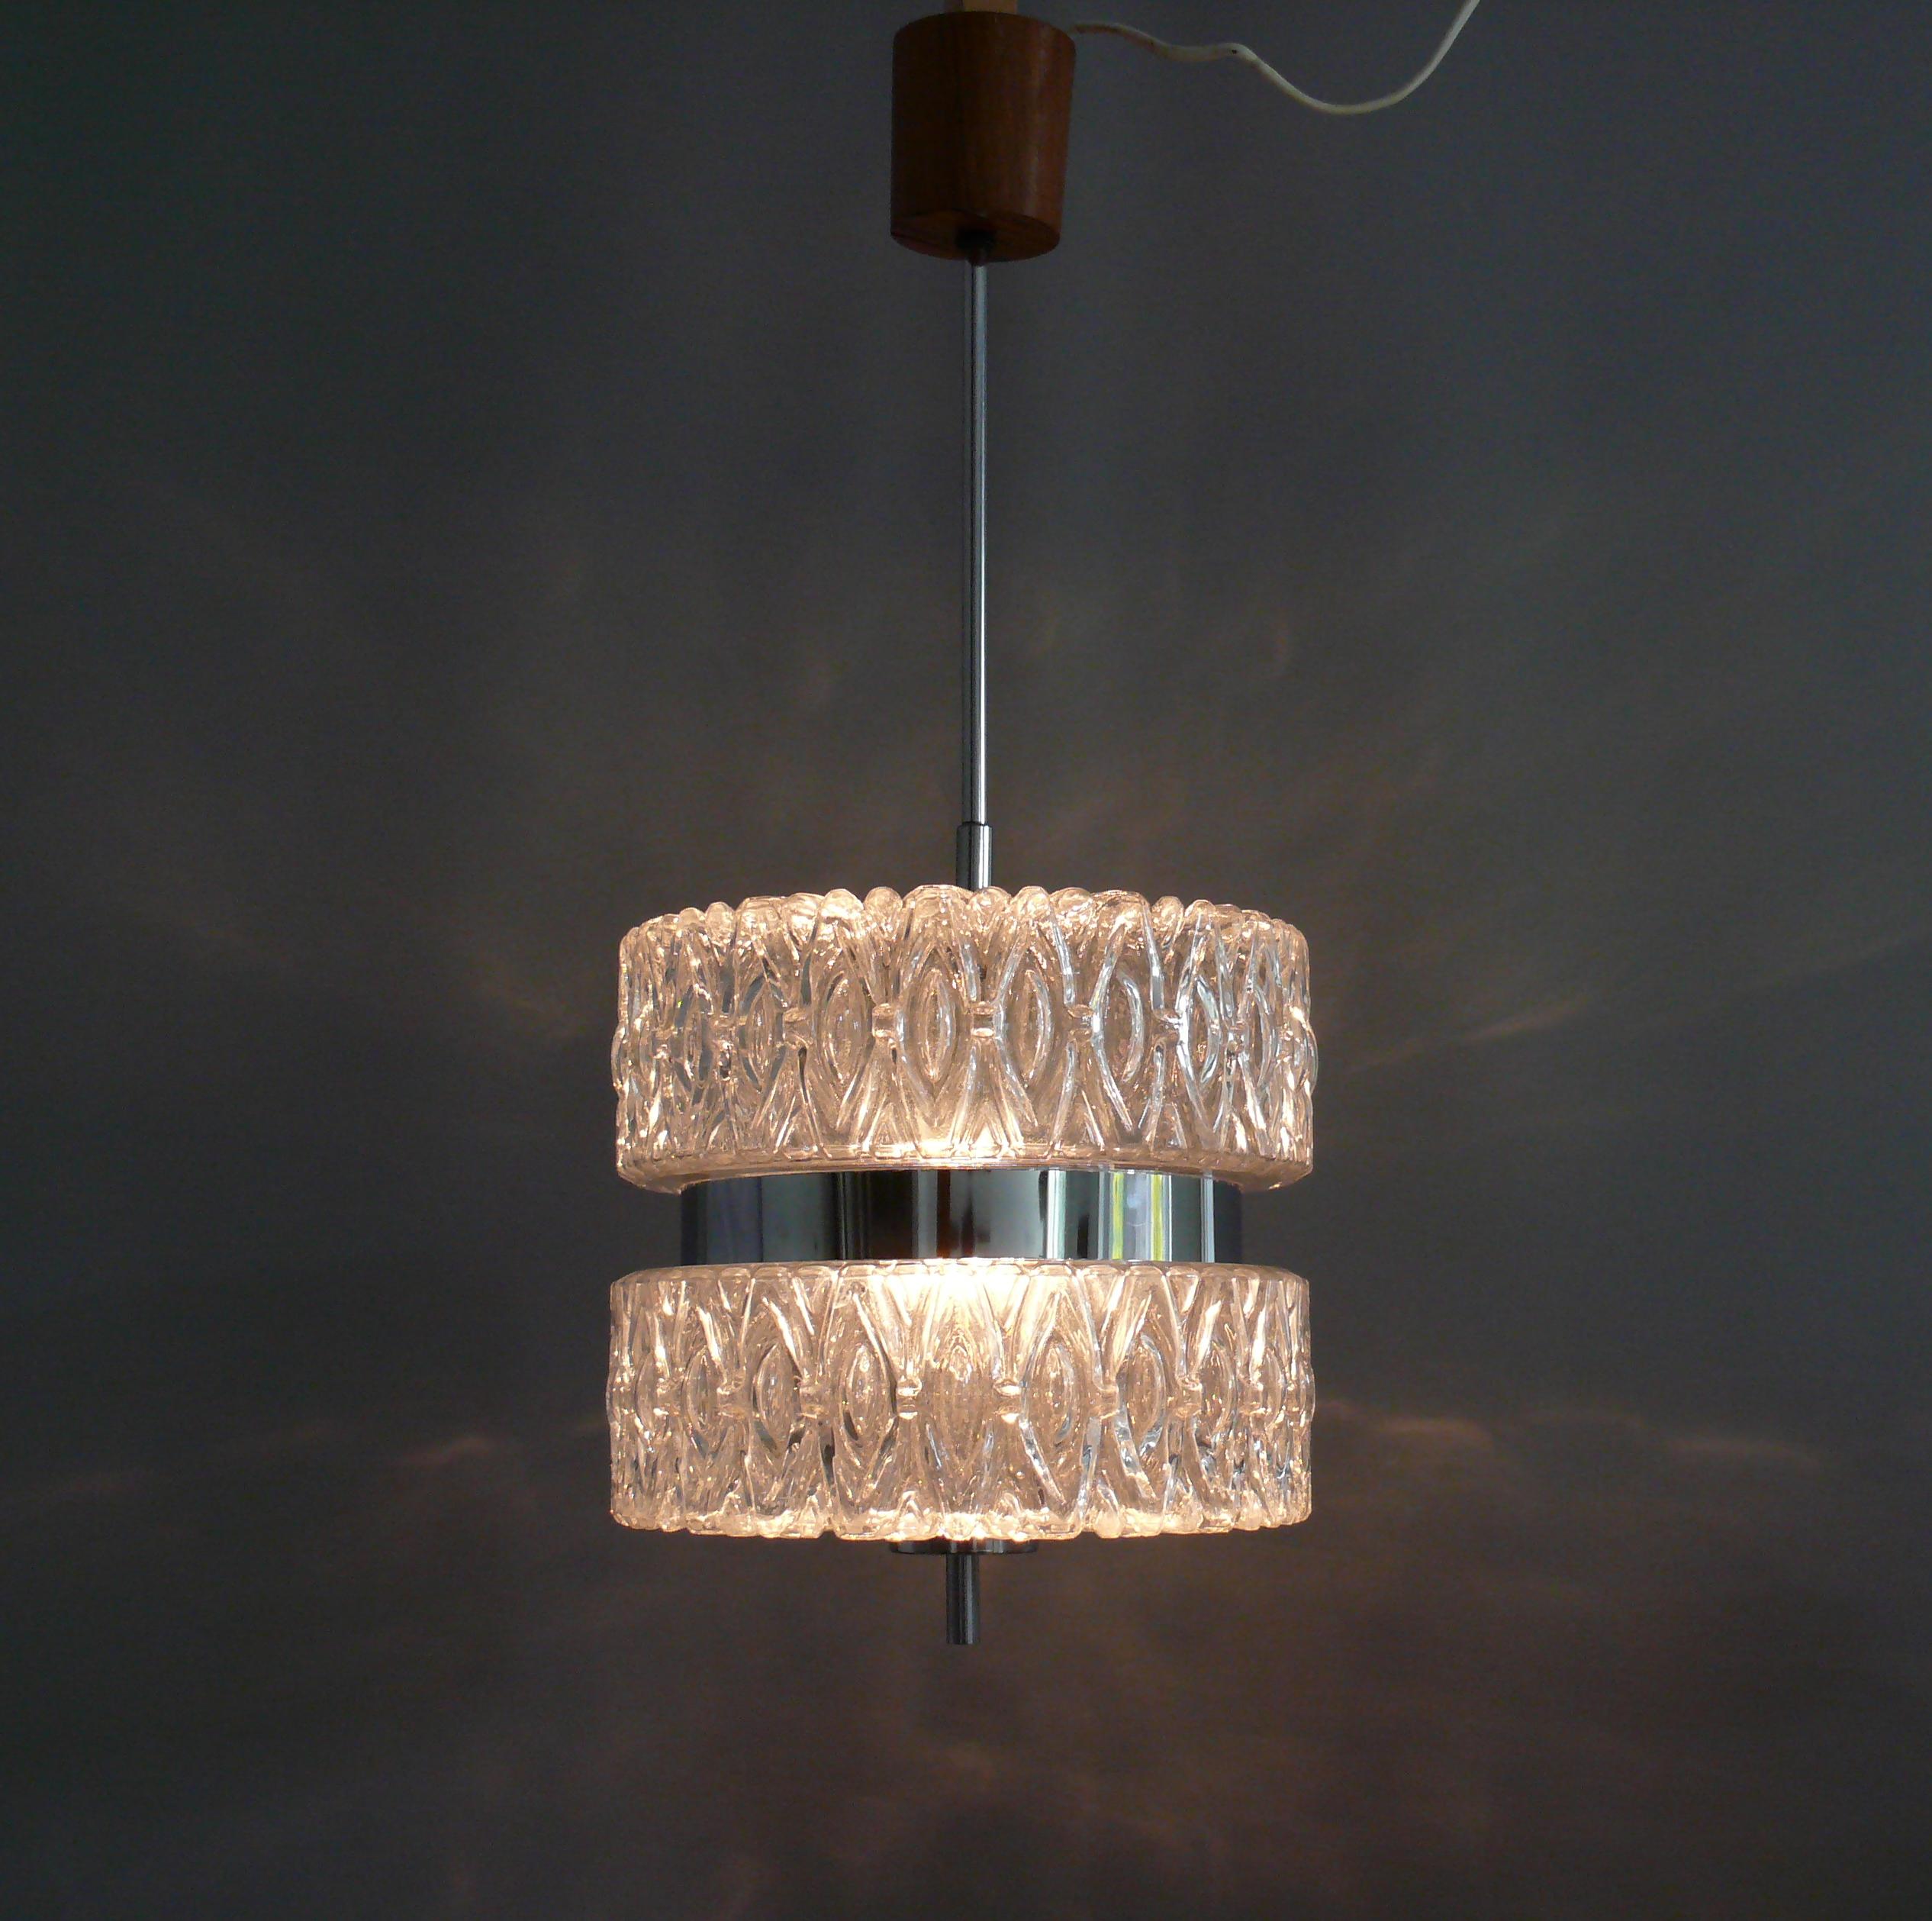 Crystal glass pendant lamp from the late 1960s - early 1970s. The two solid glass shades are interrupted by a chrome strip and held together inside by a metal bracket. The chrome pendulum rod is screwed on and can be easily replaced. The canopy is